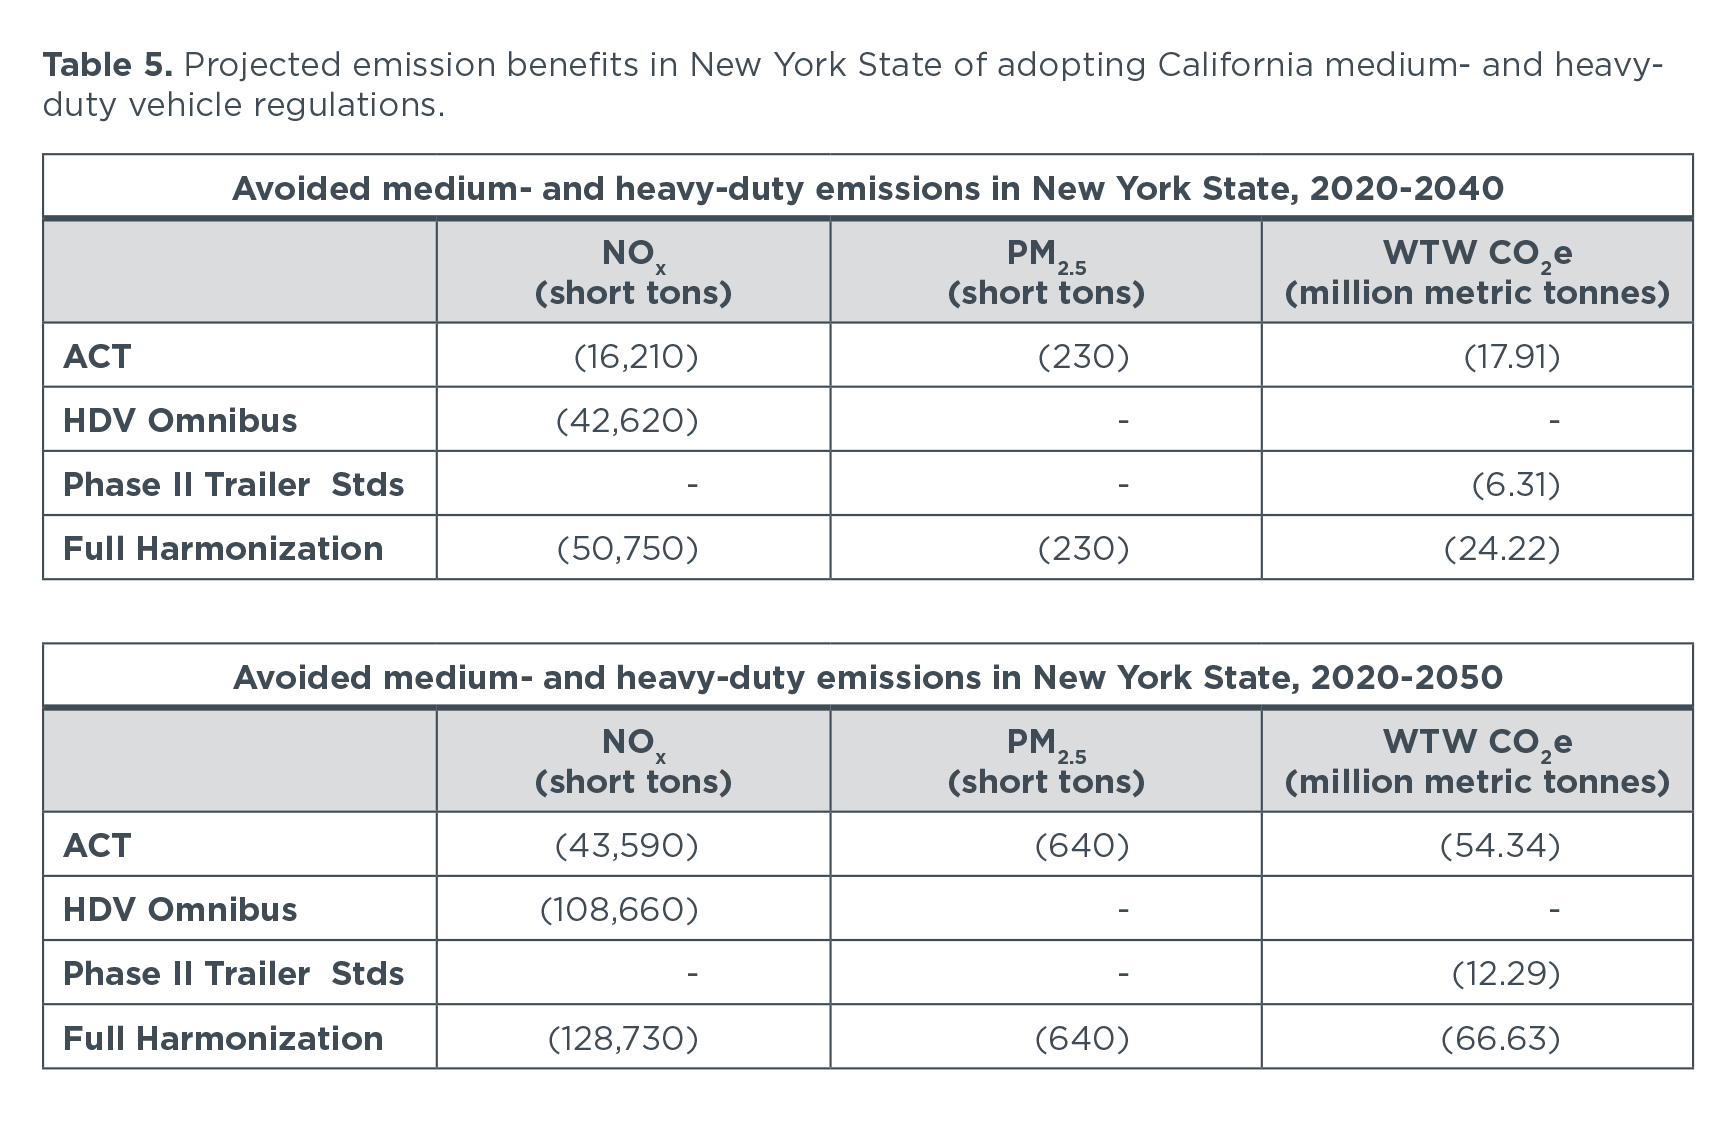 Emission benefits in New York State from HDV regulations